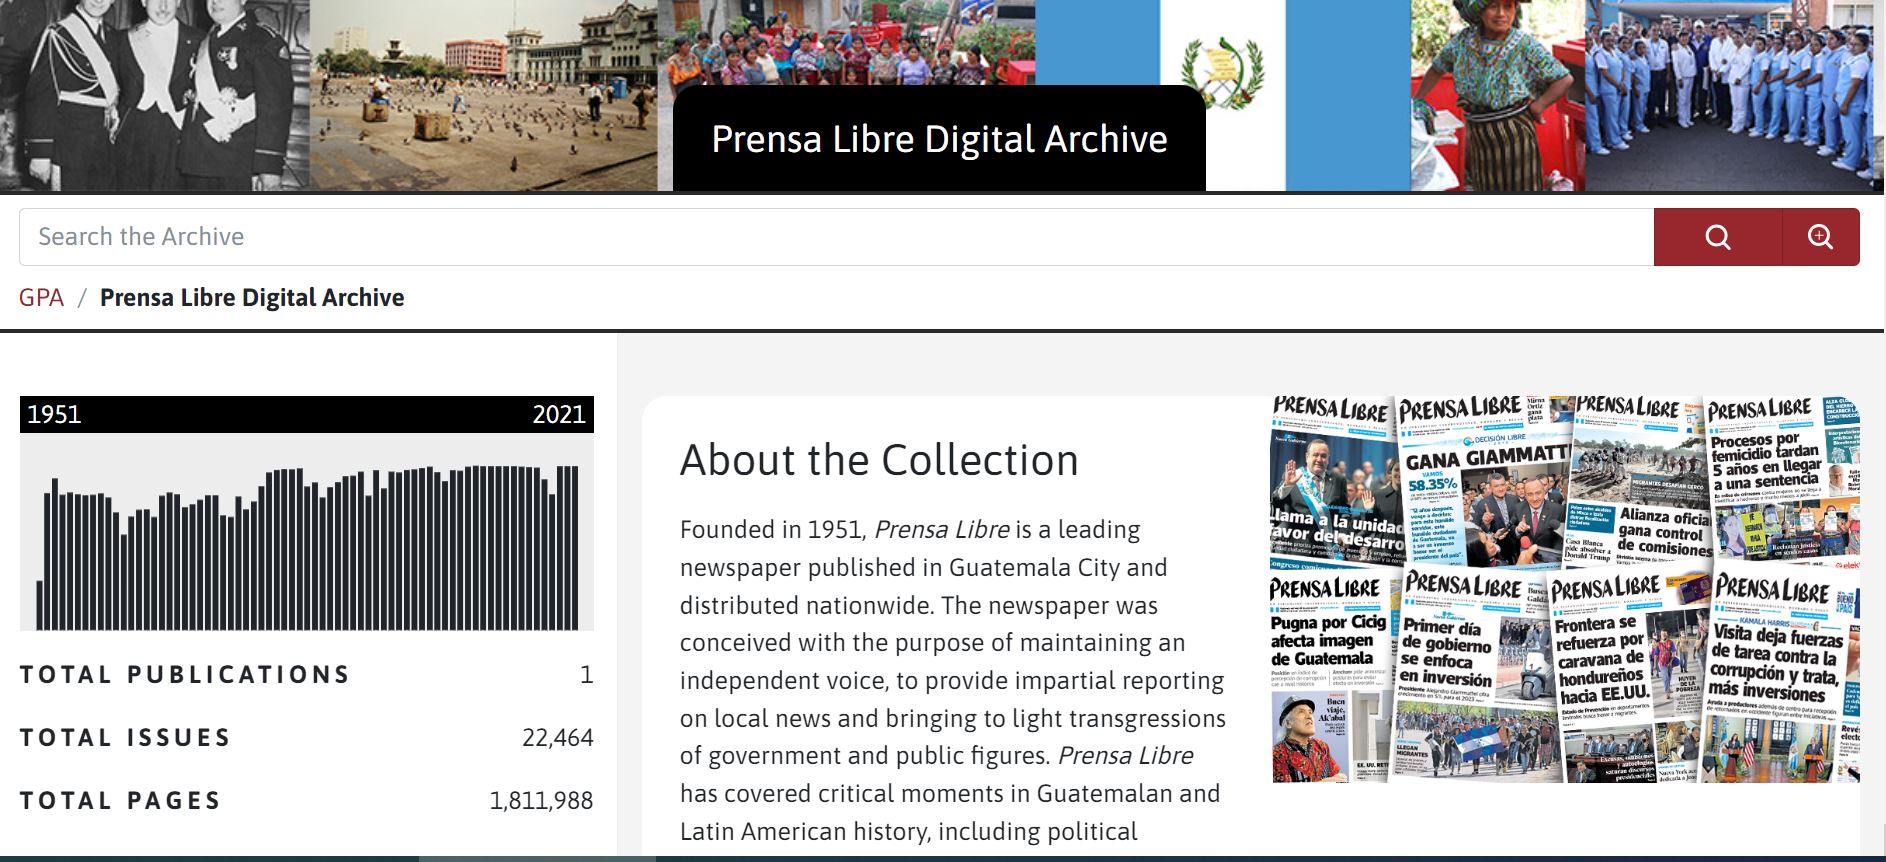 The landing page of the Prensa Libre Digital Archive.